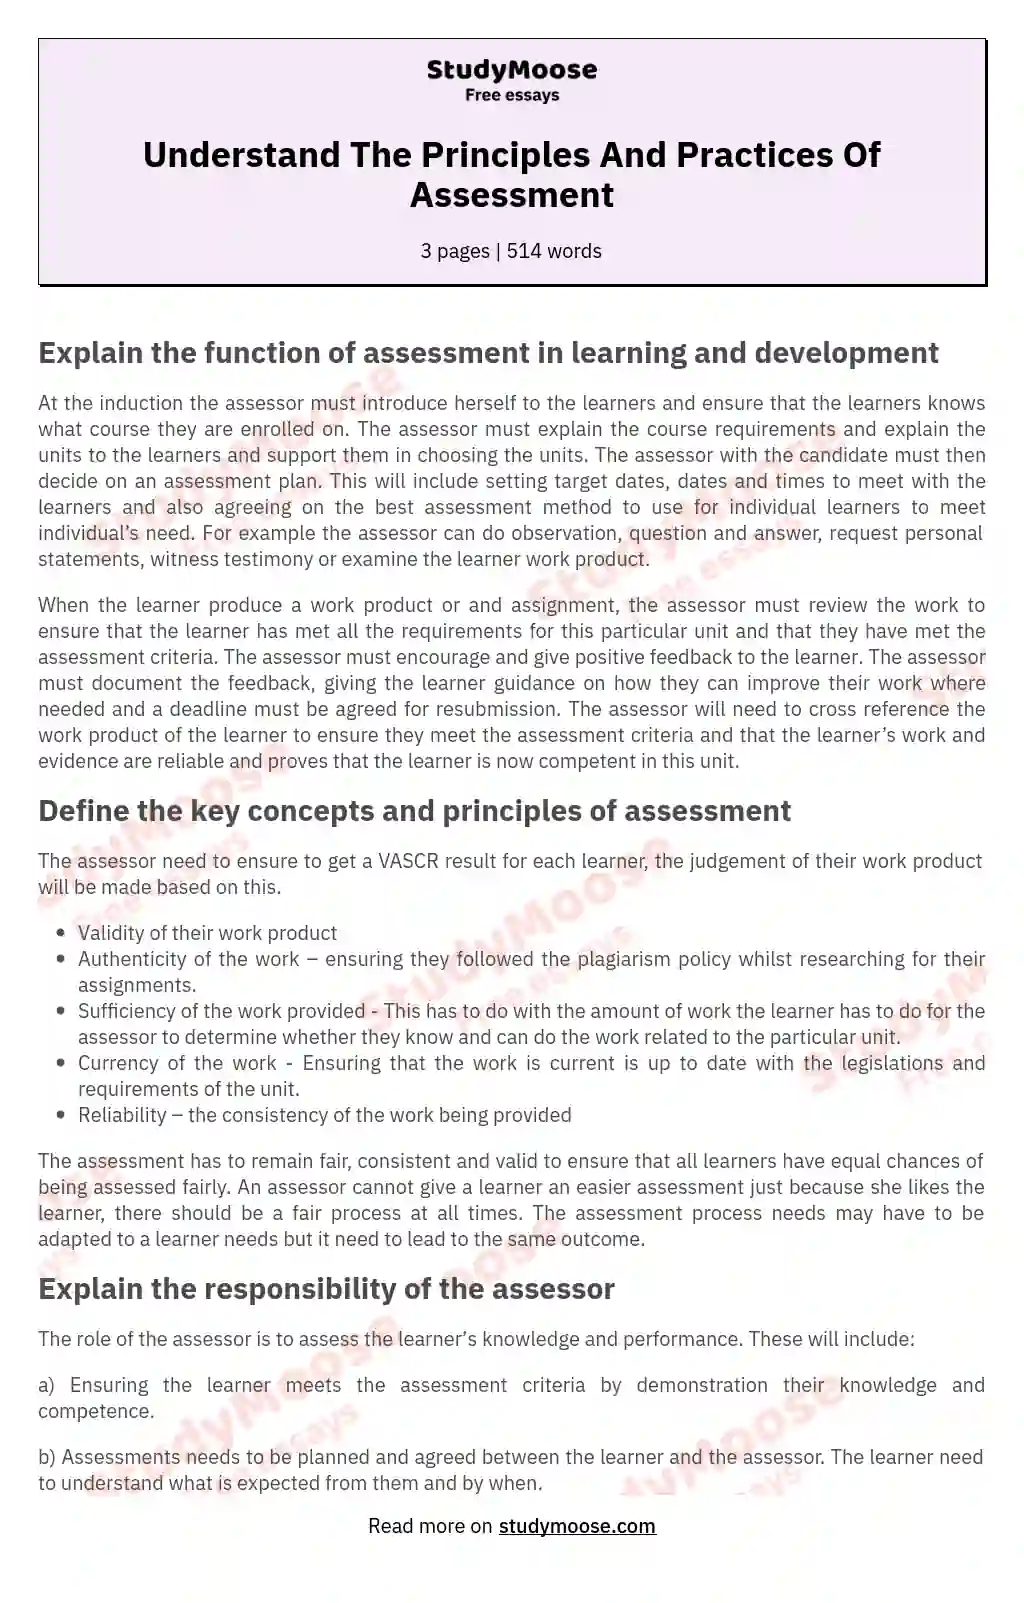 Understand The Principles And Practices Of Assessment essay